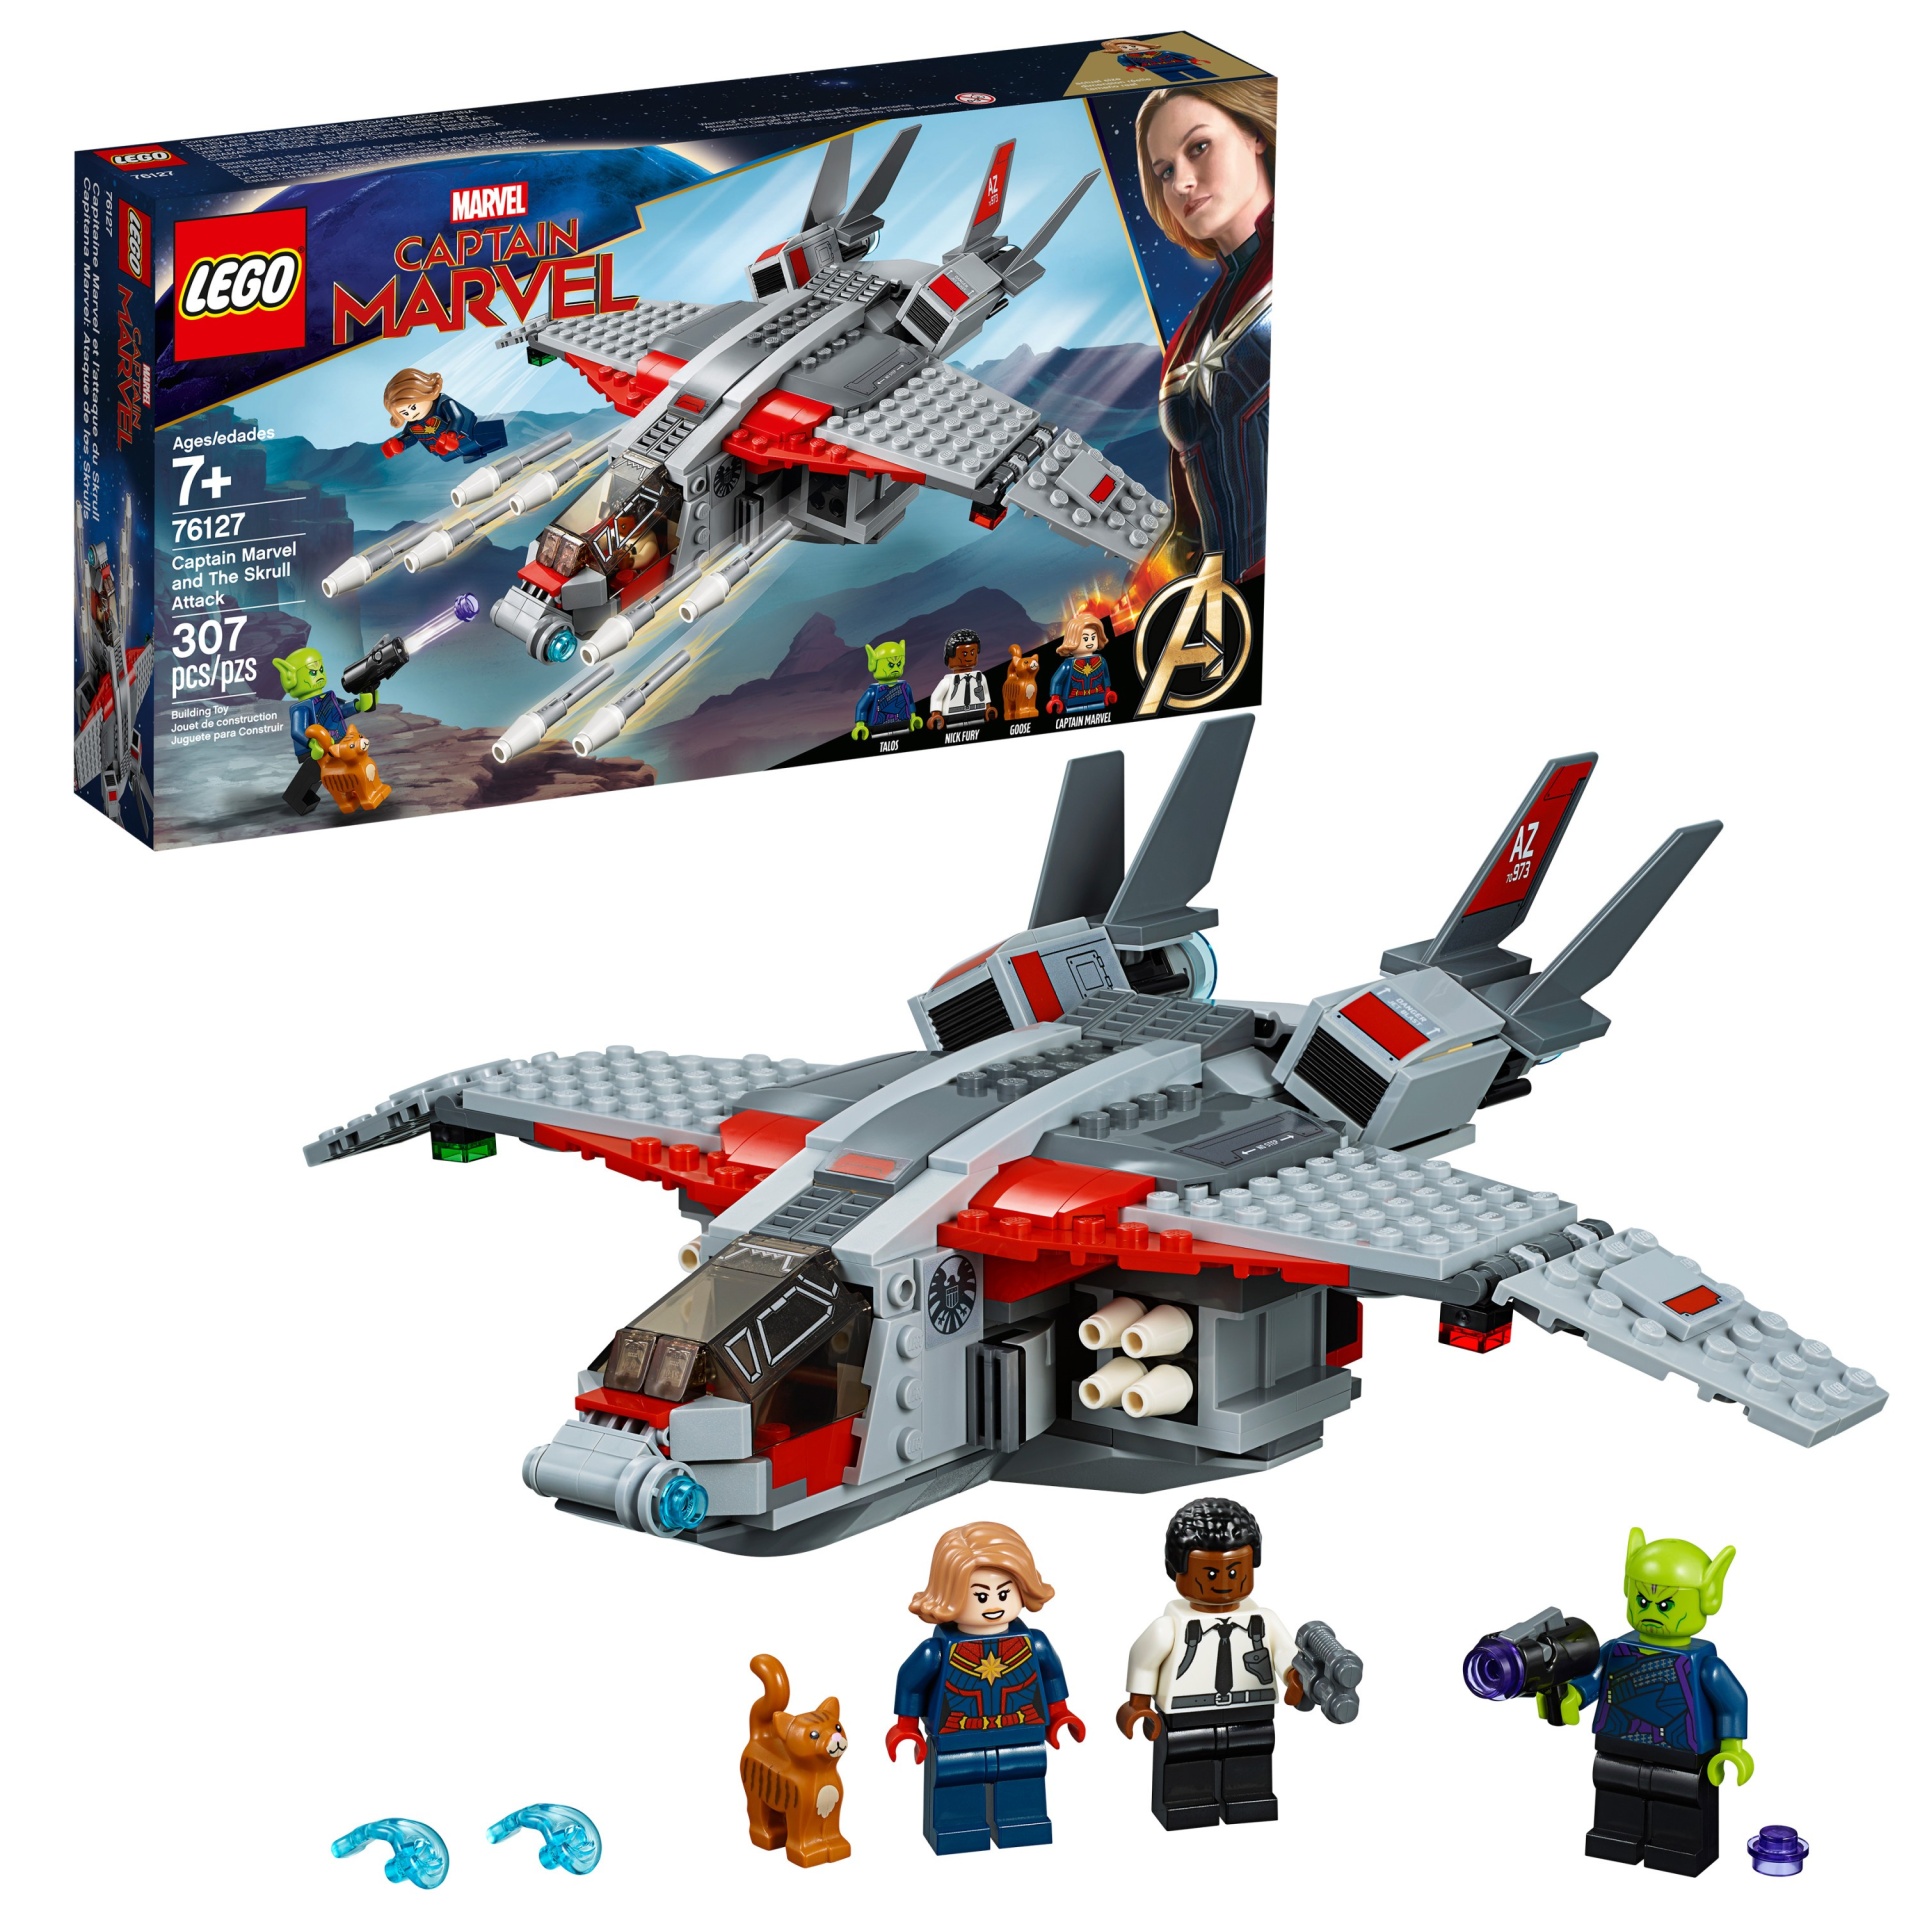 slide 1 of 6, LEGO Super Heroes Captain Marvel and the Skrull Attack, 1 ct